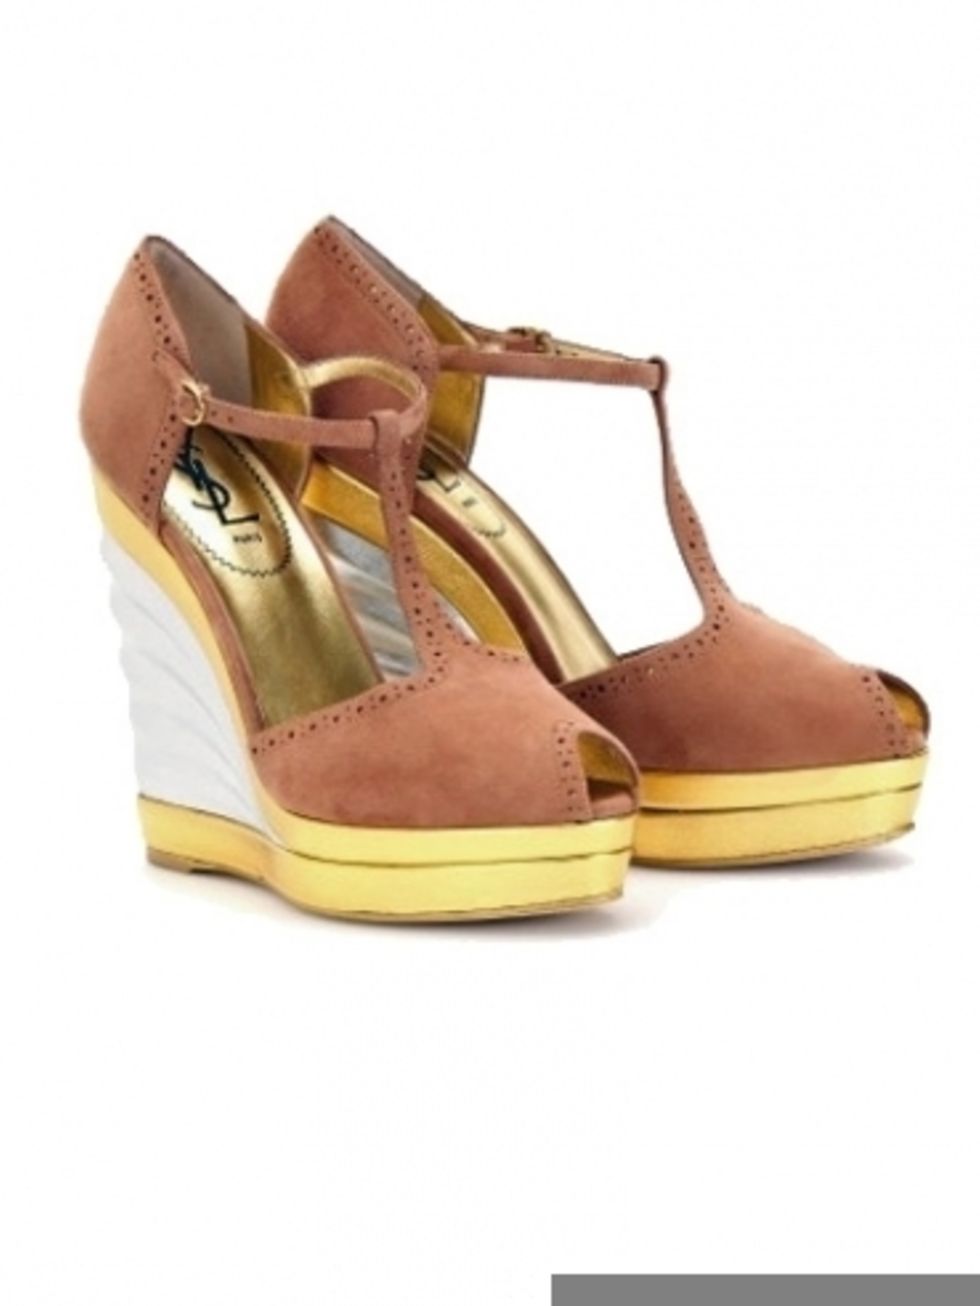 Footwear, Product, Brown, Yellow, Tan, Fashion, Liver, Maroon, Beige, Fawn, 